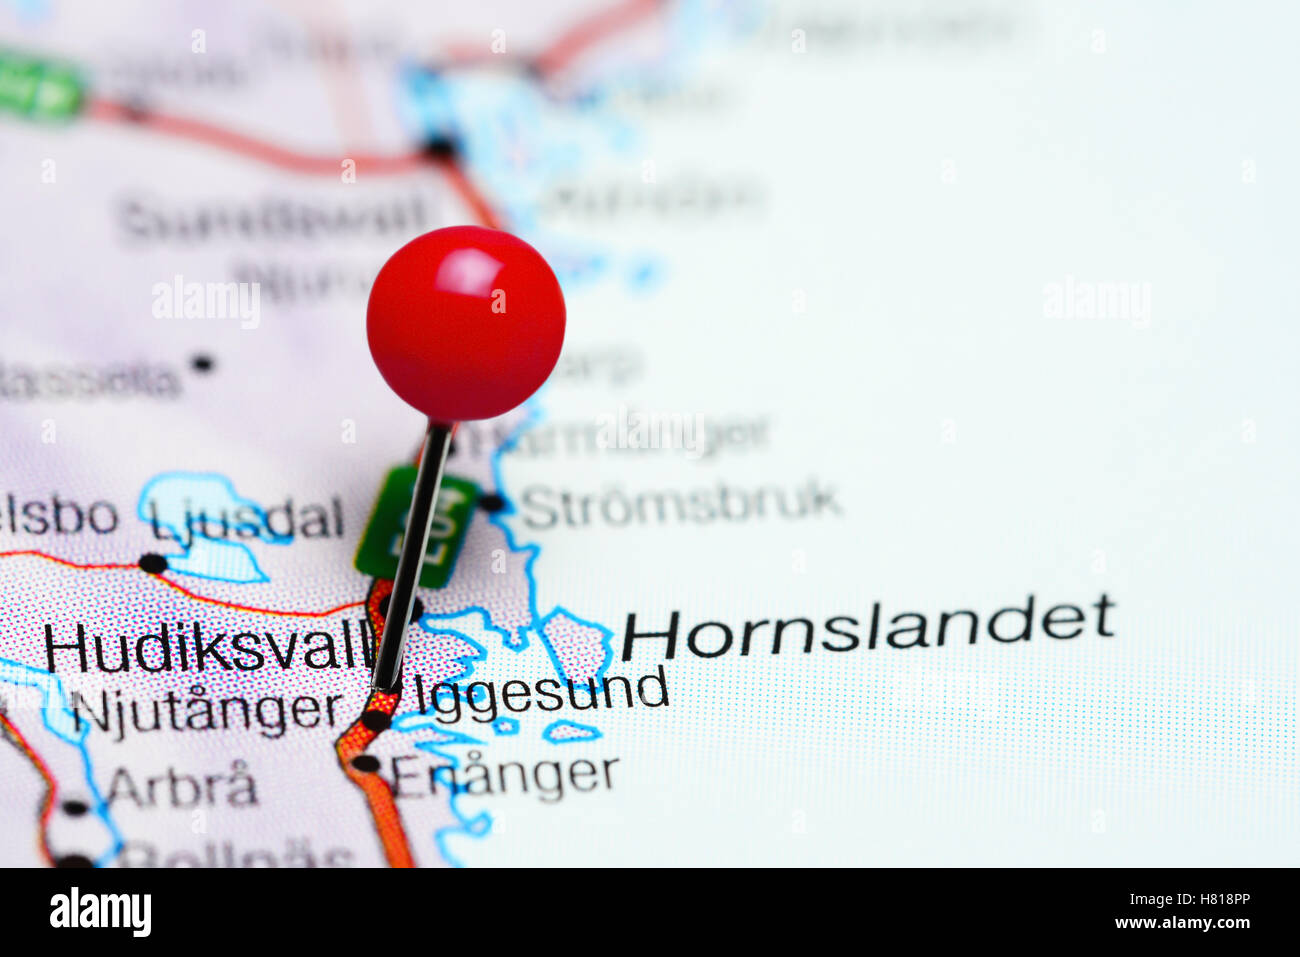 Iggesund pinned on a map of Sweden Stock Photo